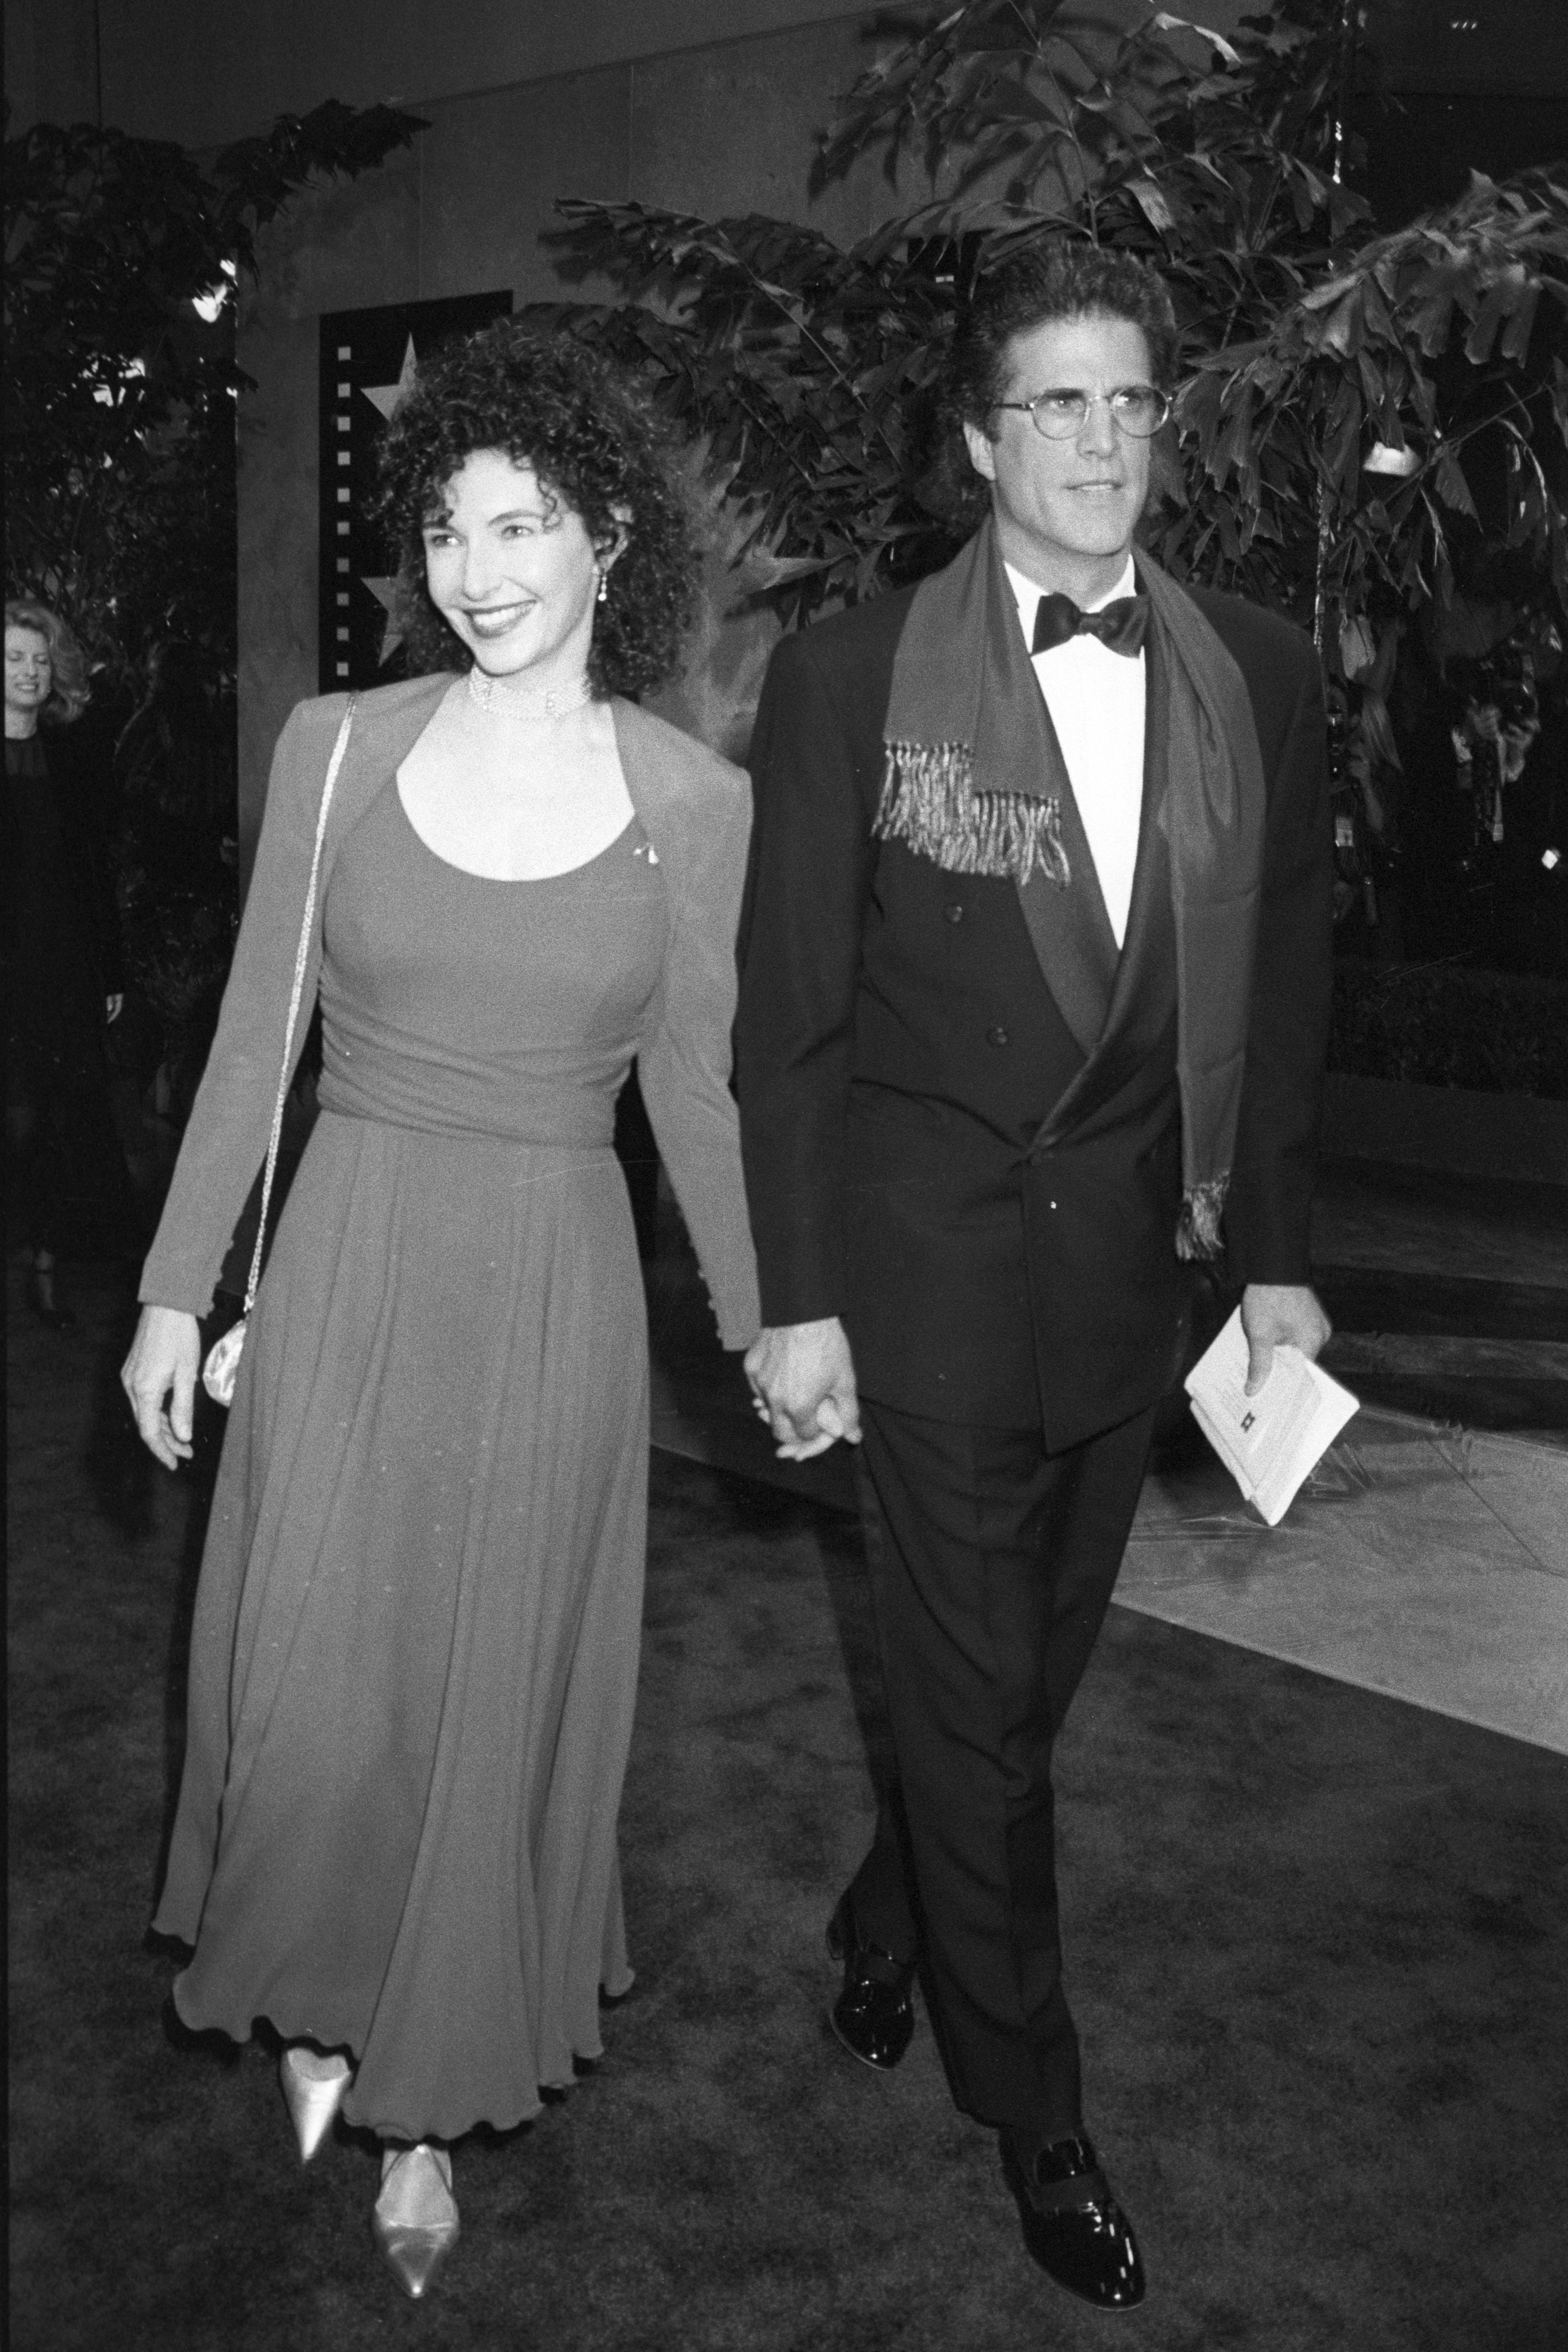 Ted Danson and Mary Steenburgen attend the American Film Institute awards ceremony on March 4, 1994. | Source: Getty Images